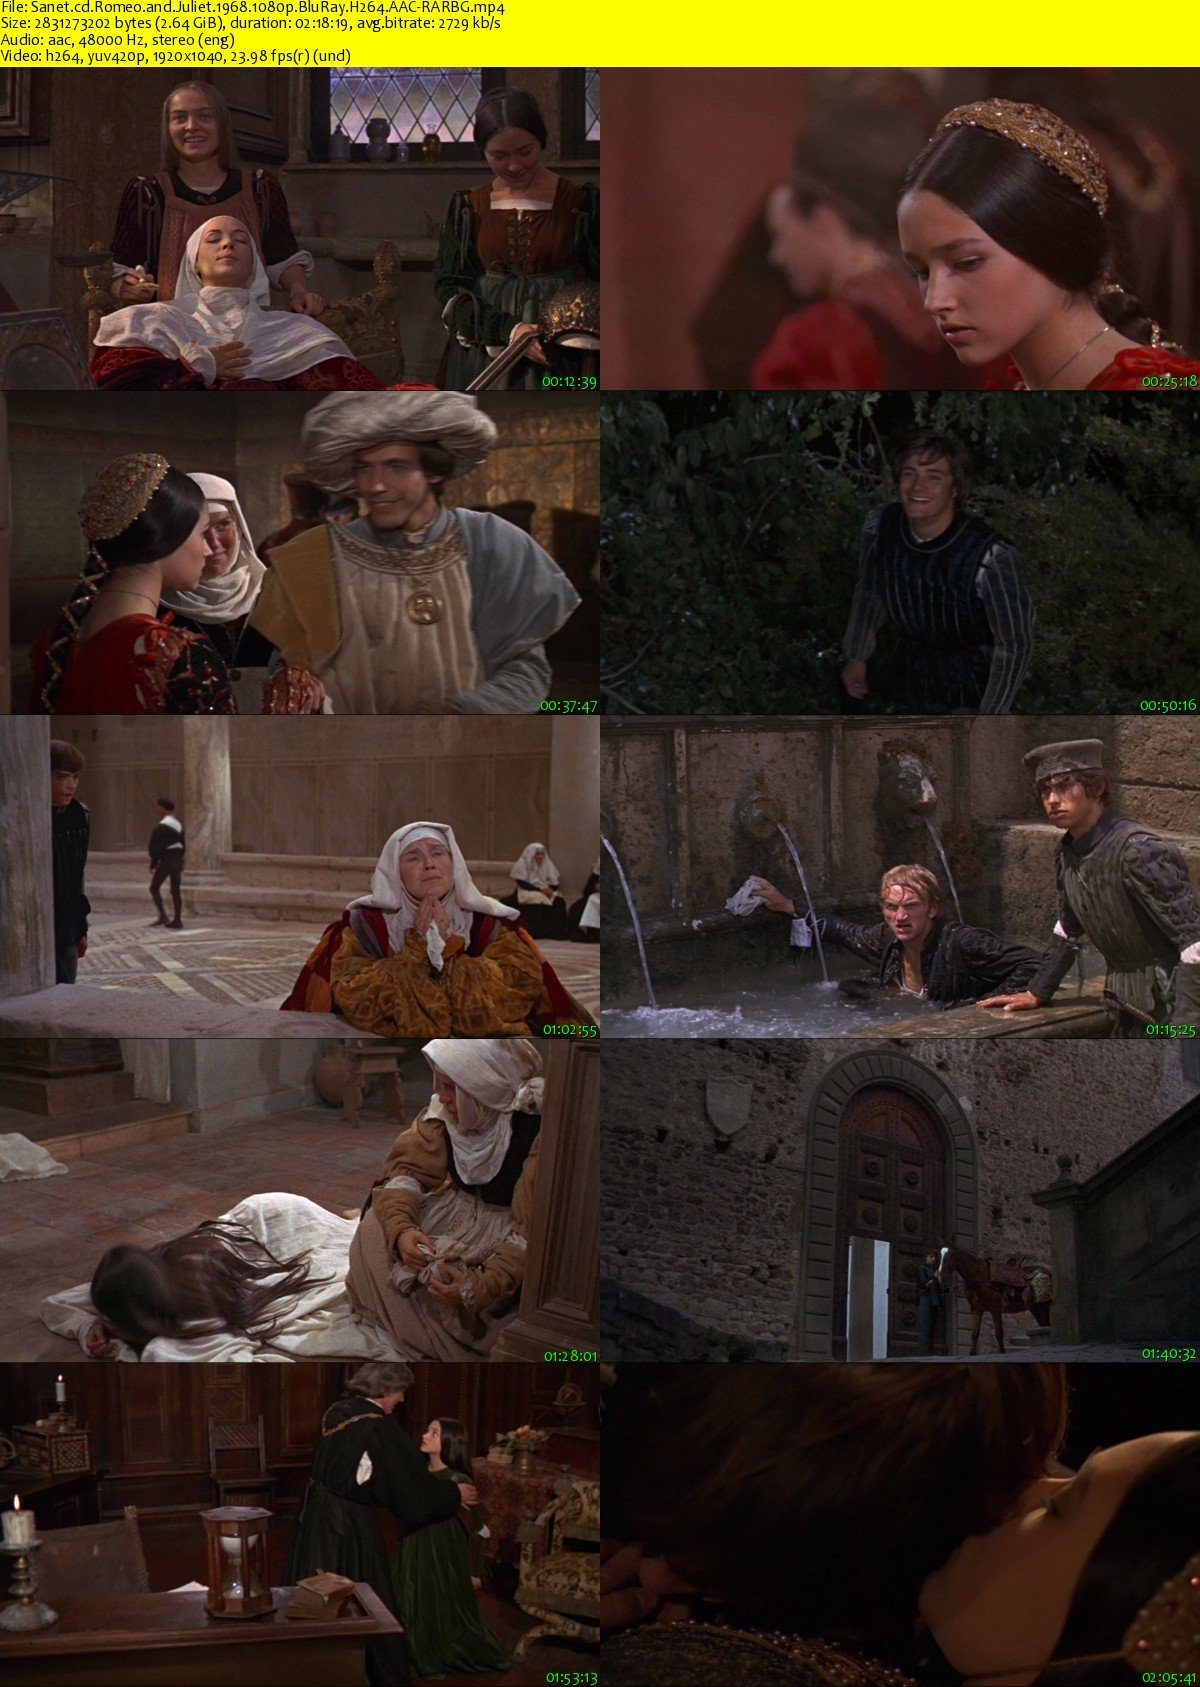 download romeo and juliet 1996 bluray